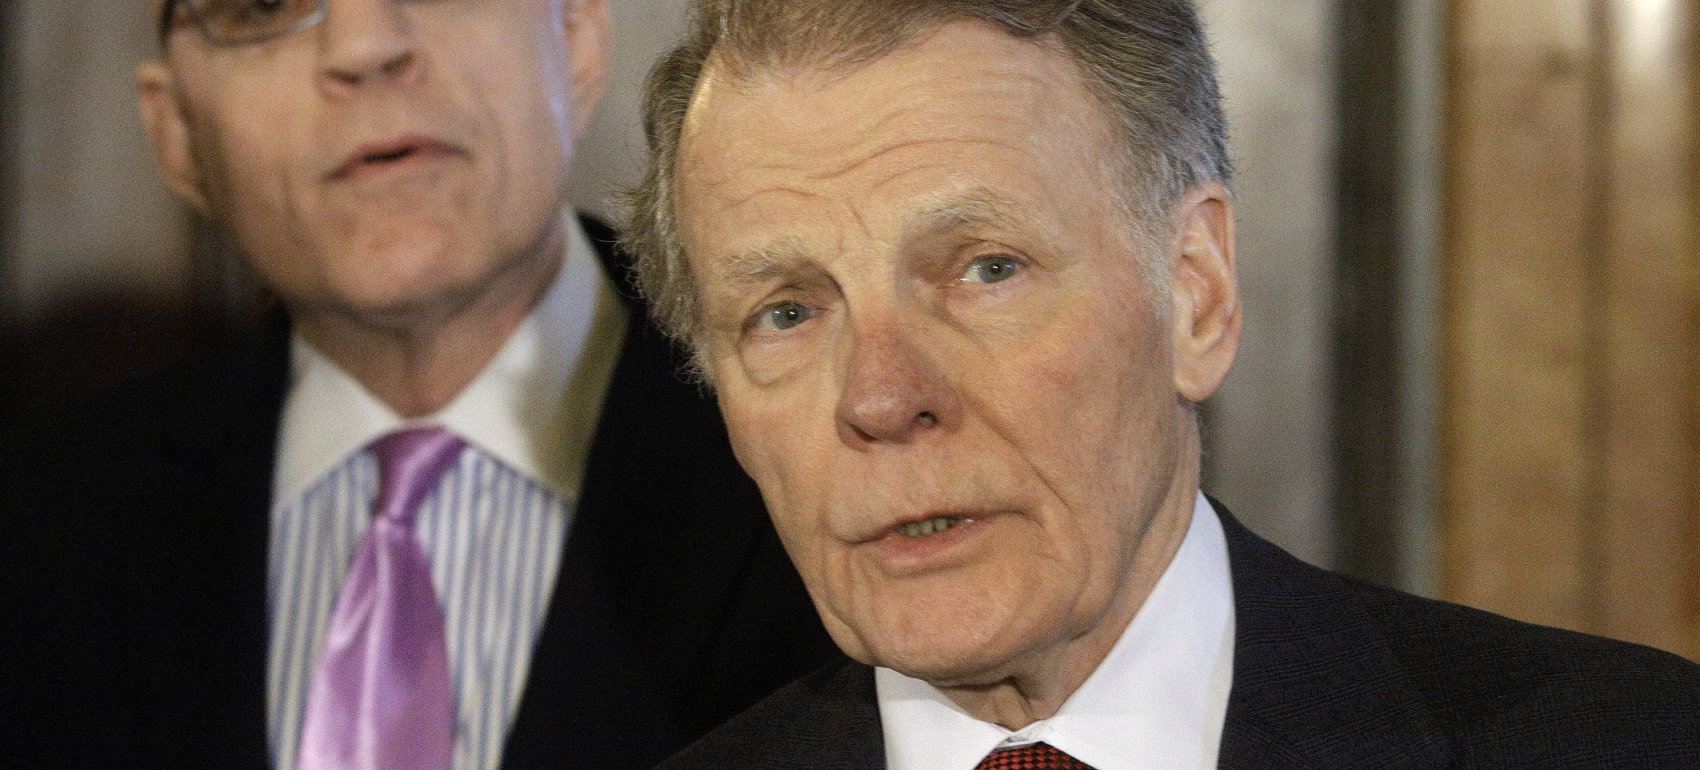 Illinois' mountain of debt will be Madigan's fiscal legacy